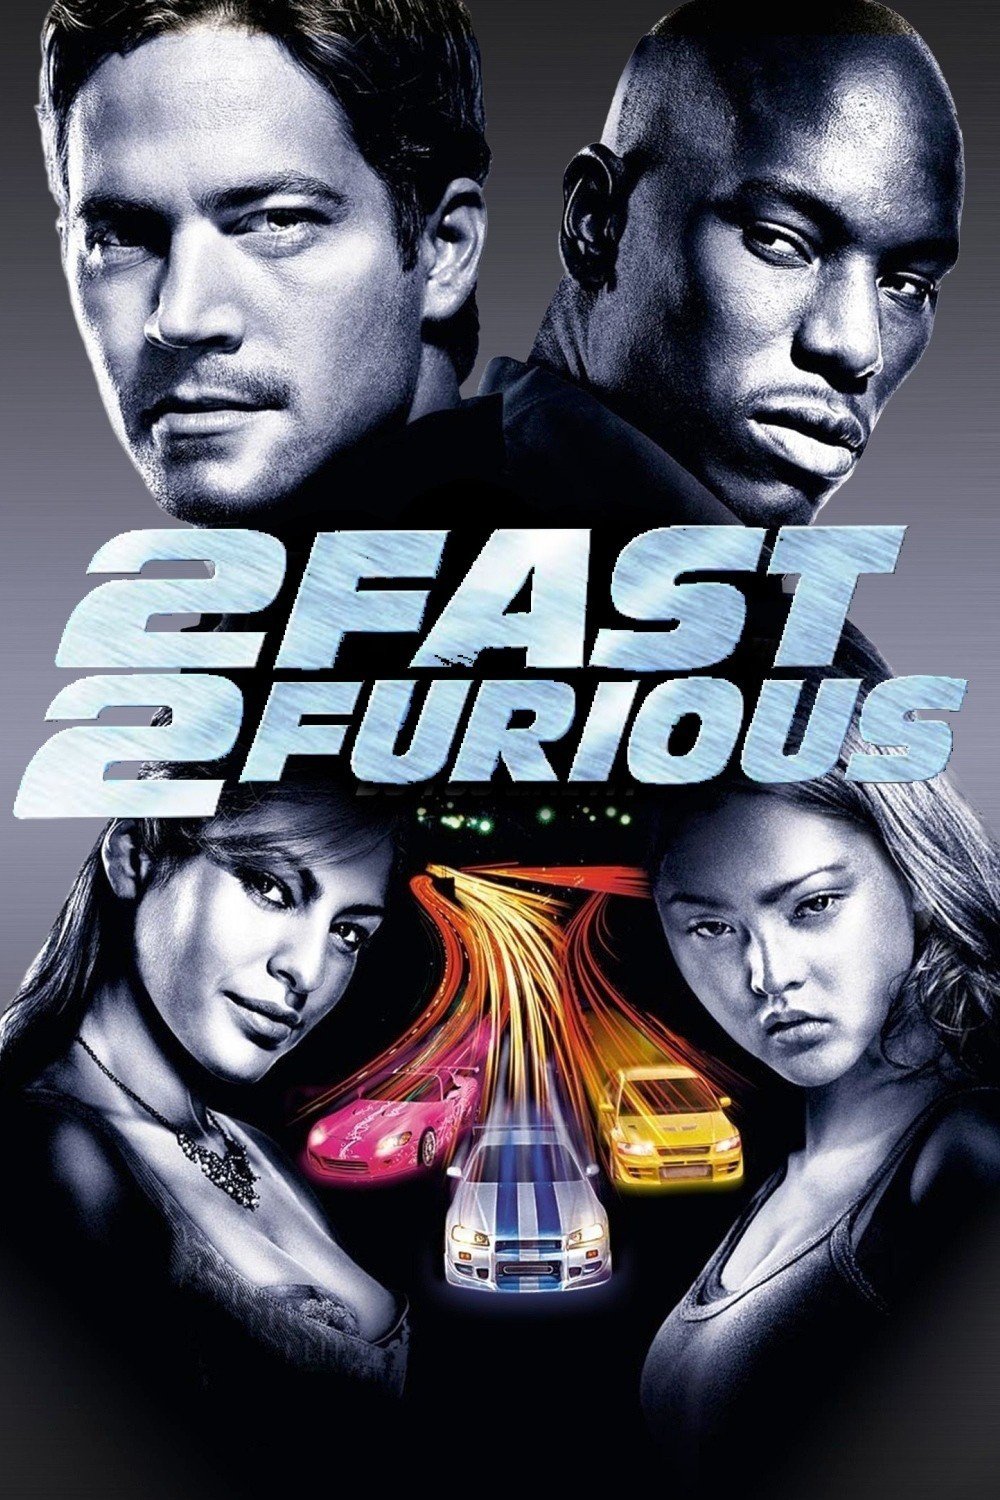 2 fast 2 furious act a fool mp3 download